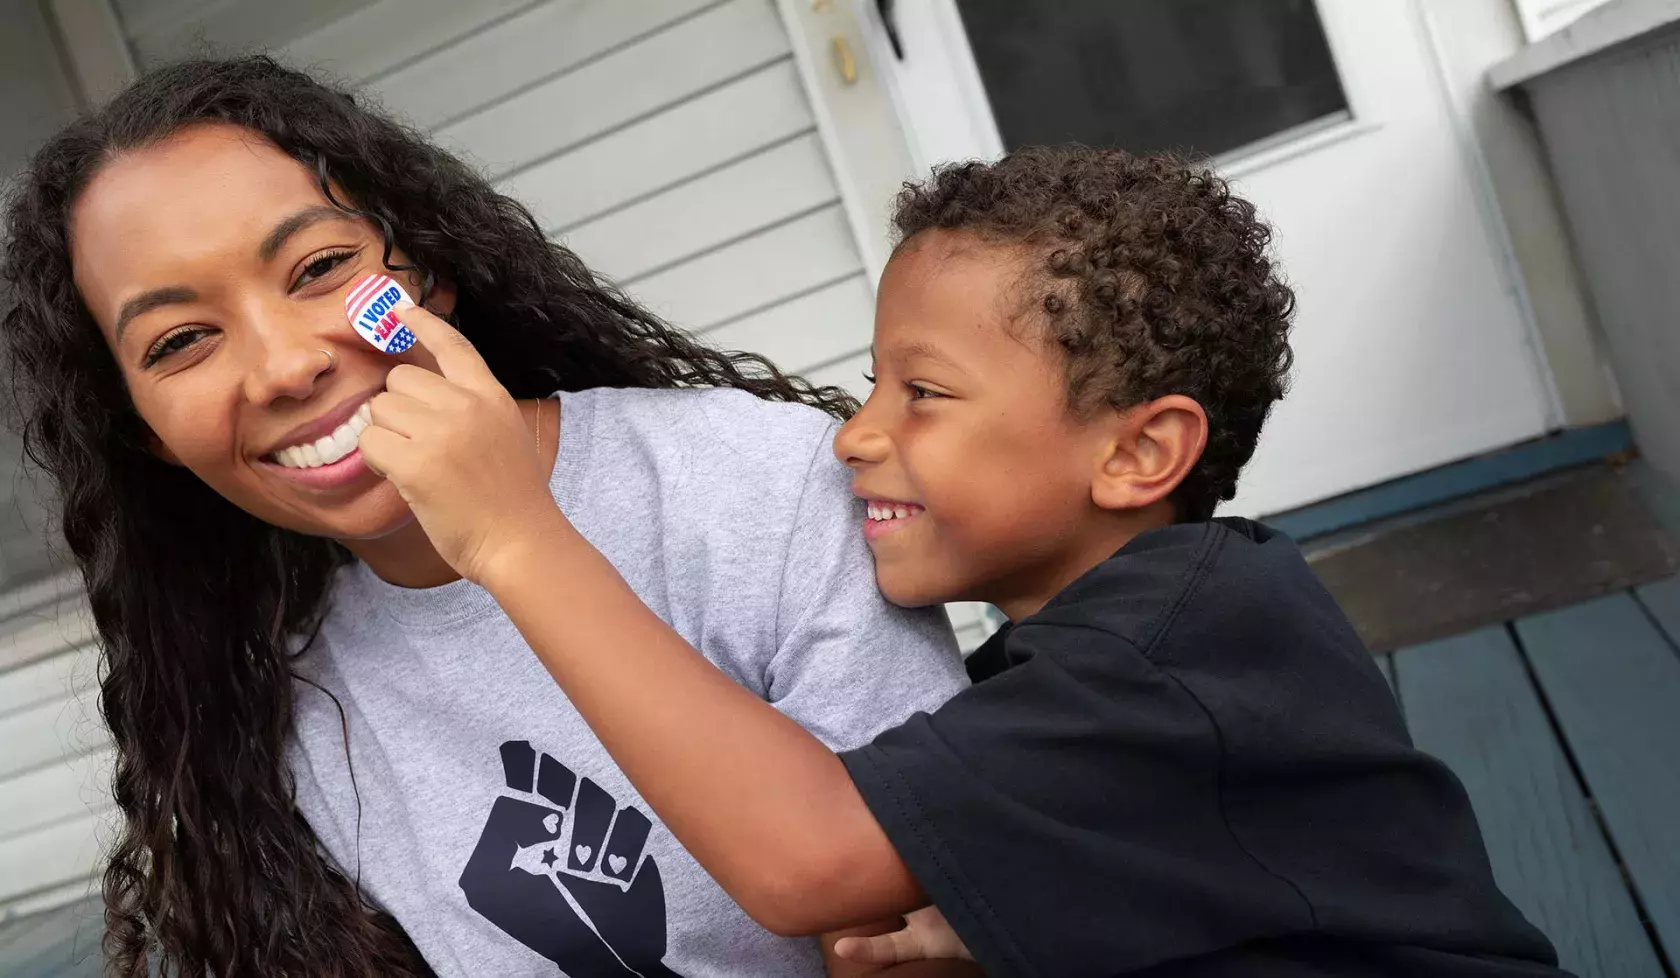 Black Child Putting "I Voted" Sticker on Woman's Cheek - Smiling